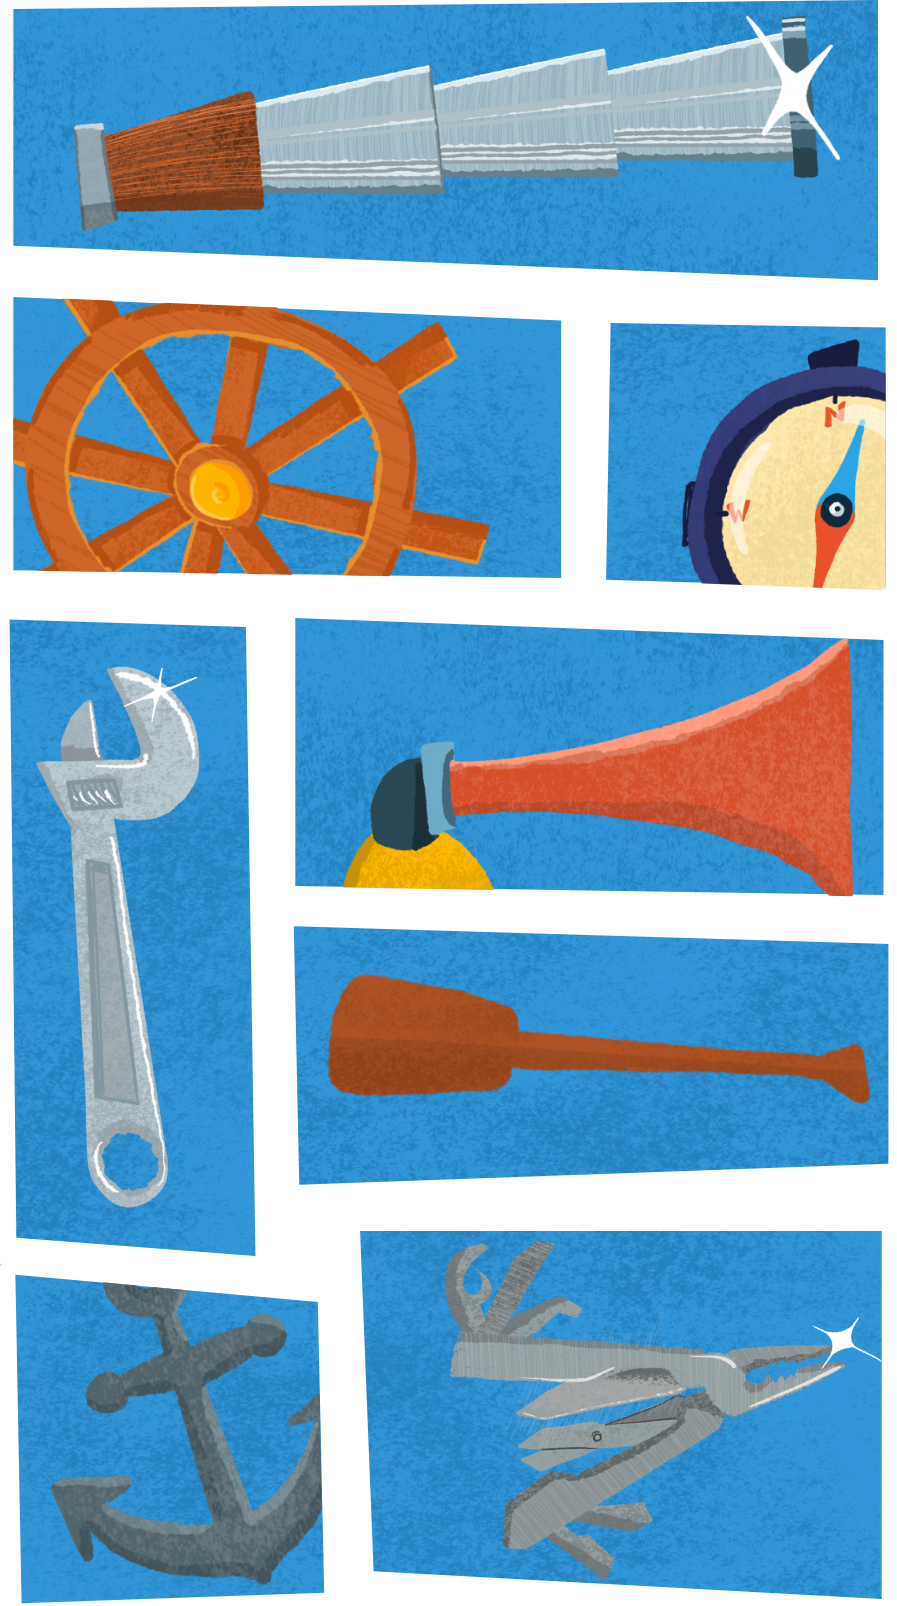 Security tools